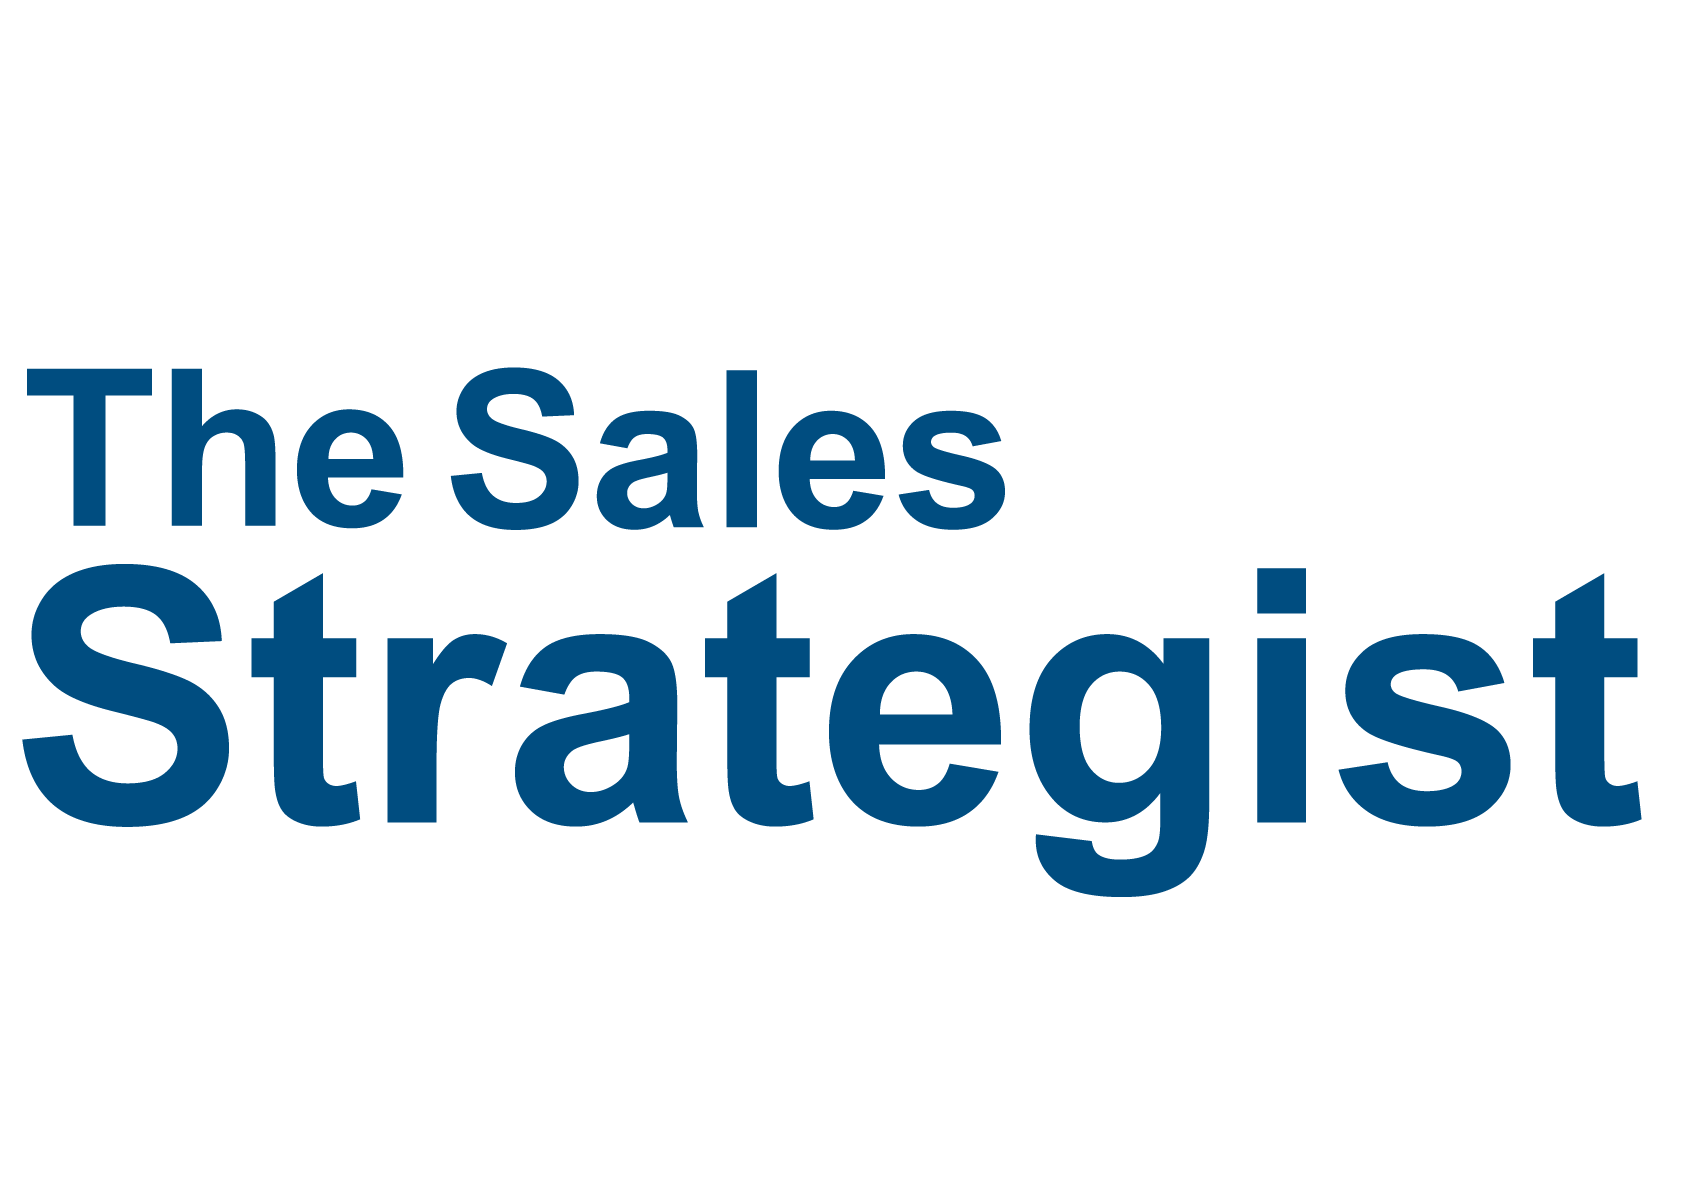 The Sales Strategist